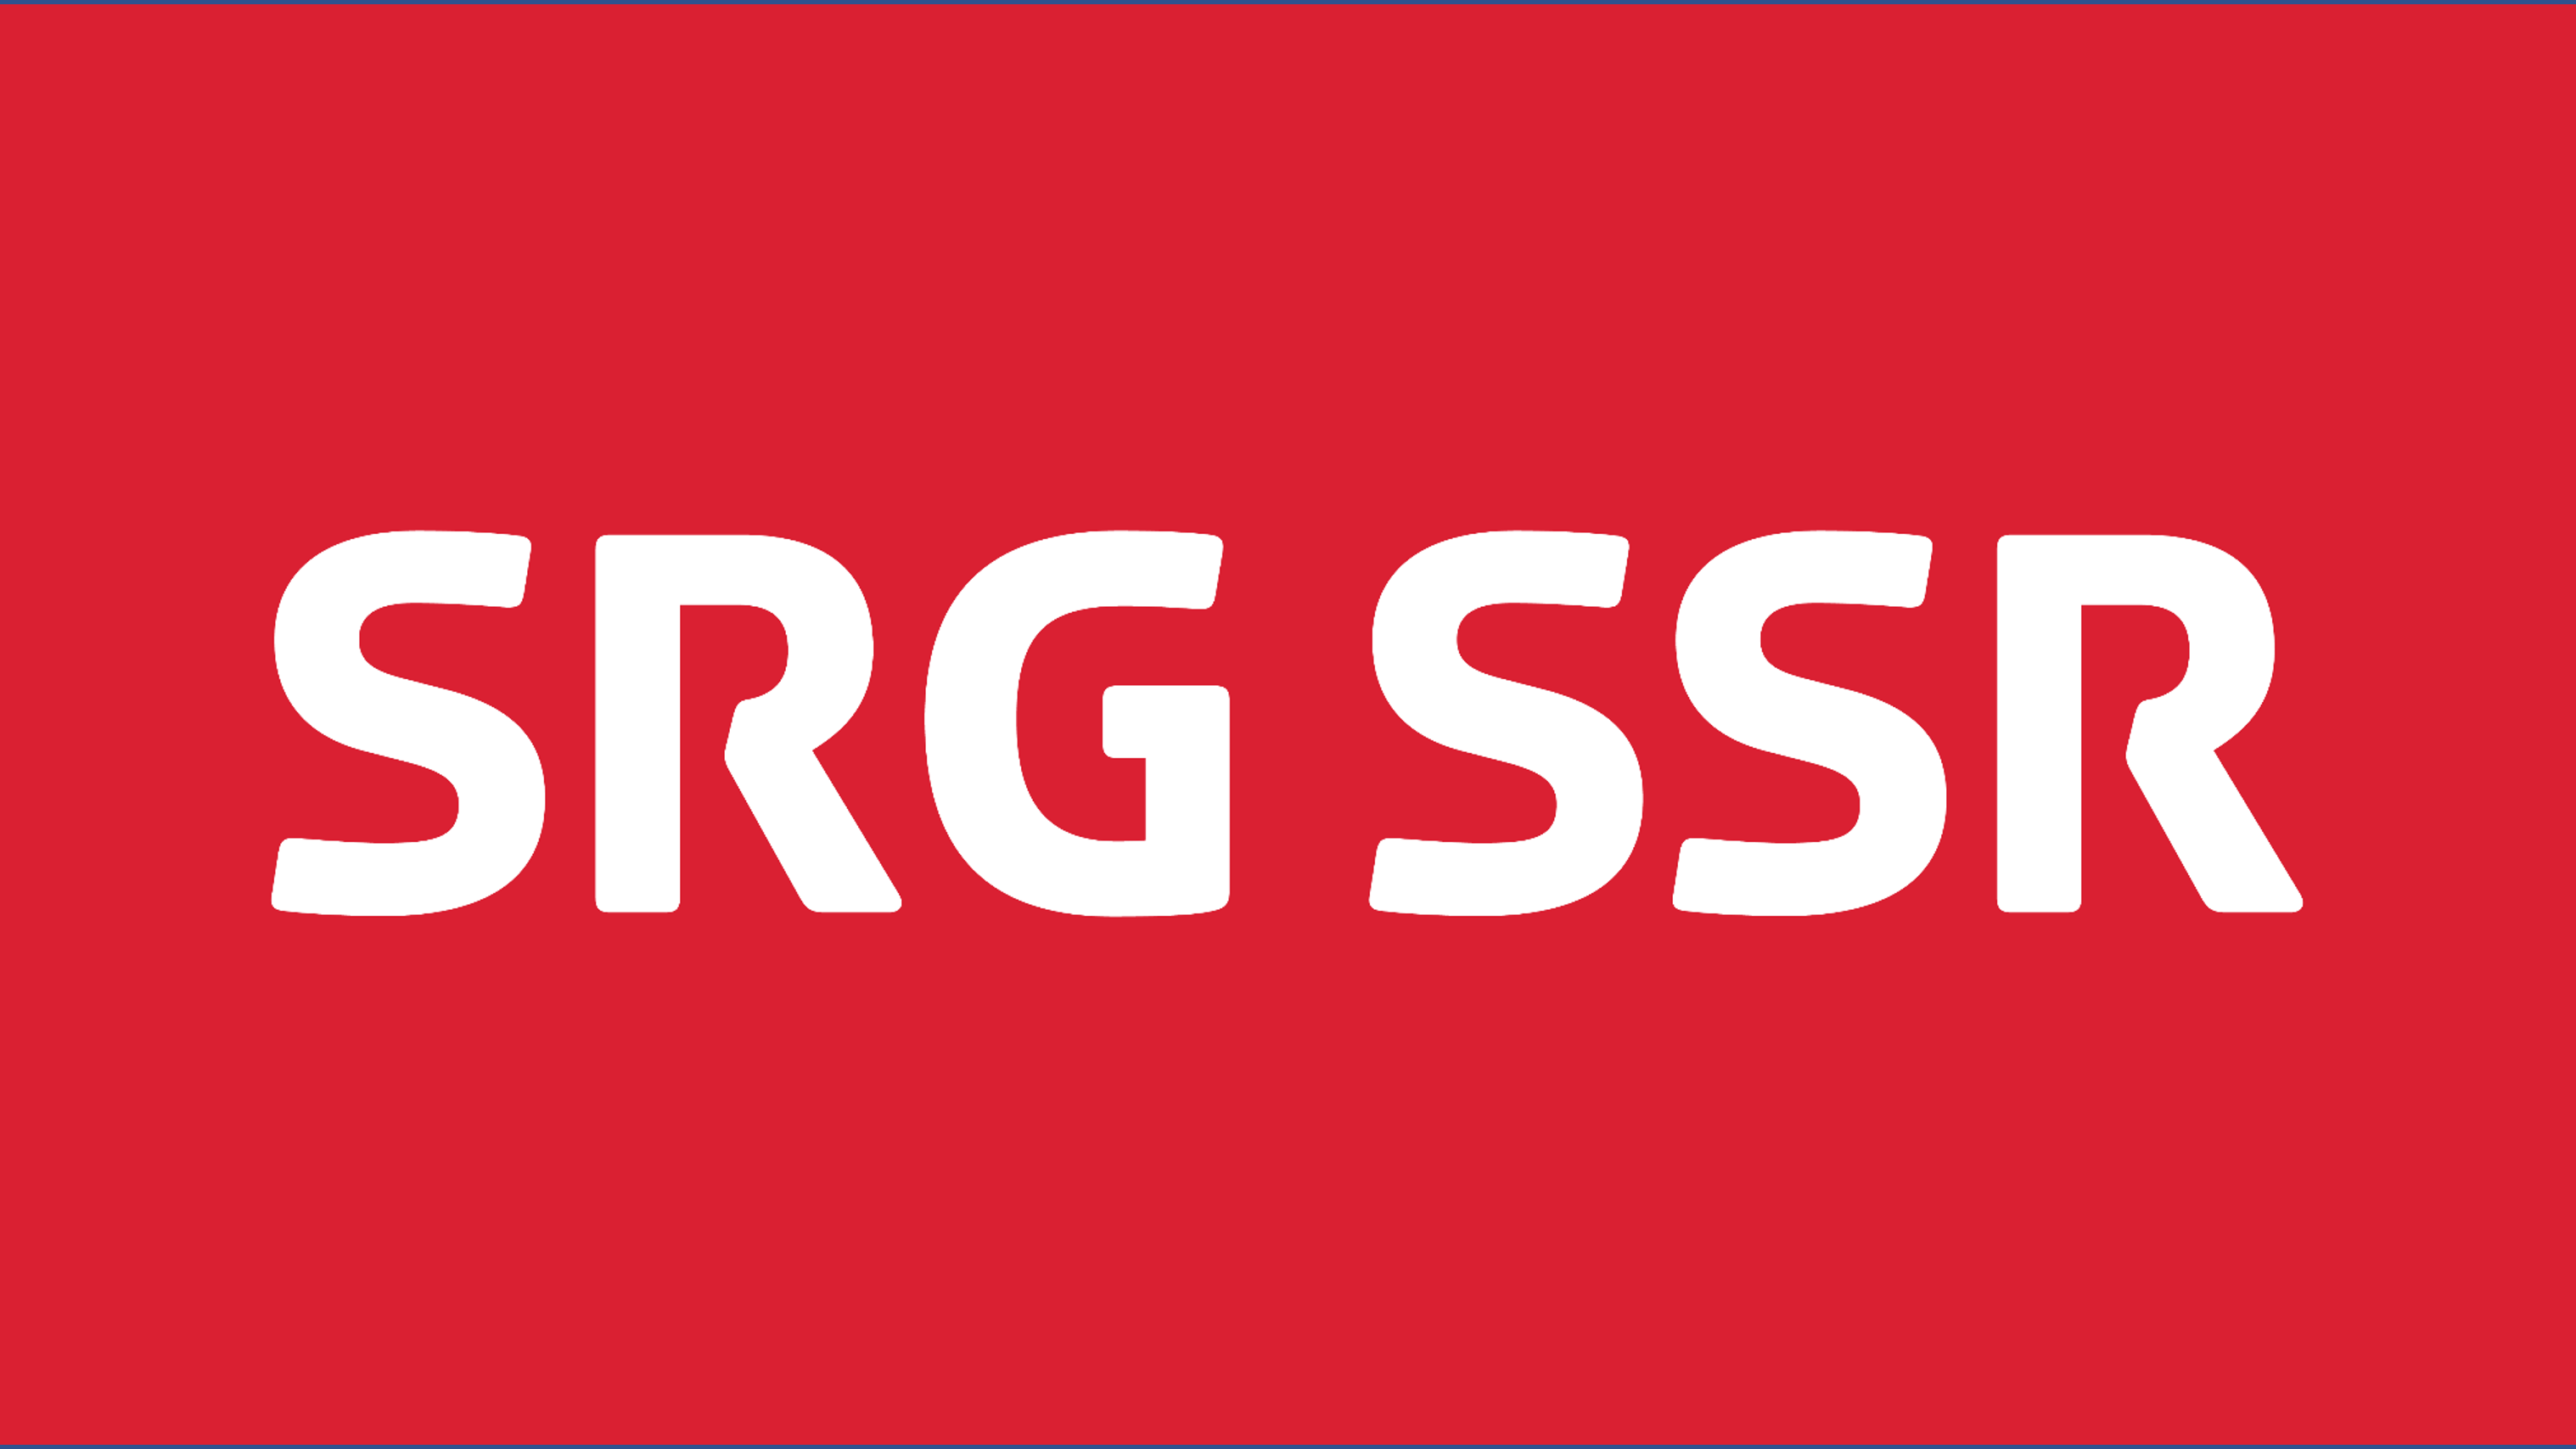 What does SRG SSR stand for?